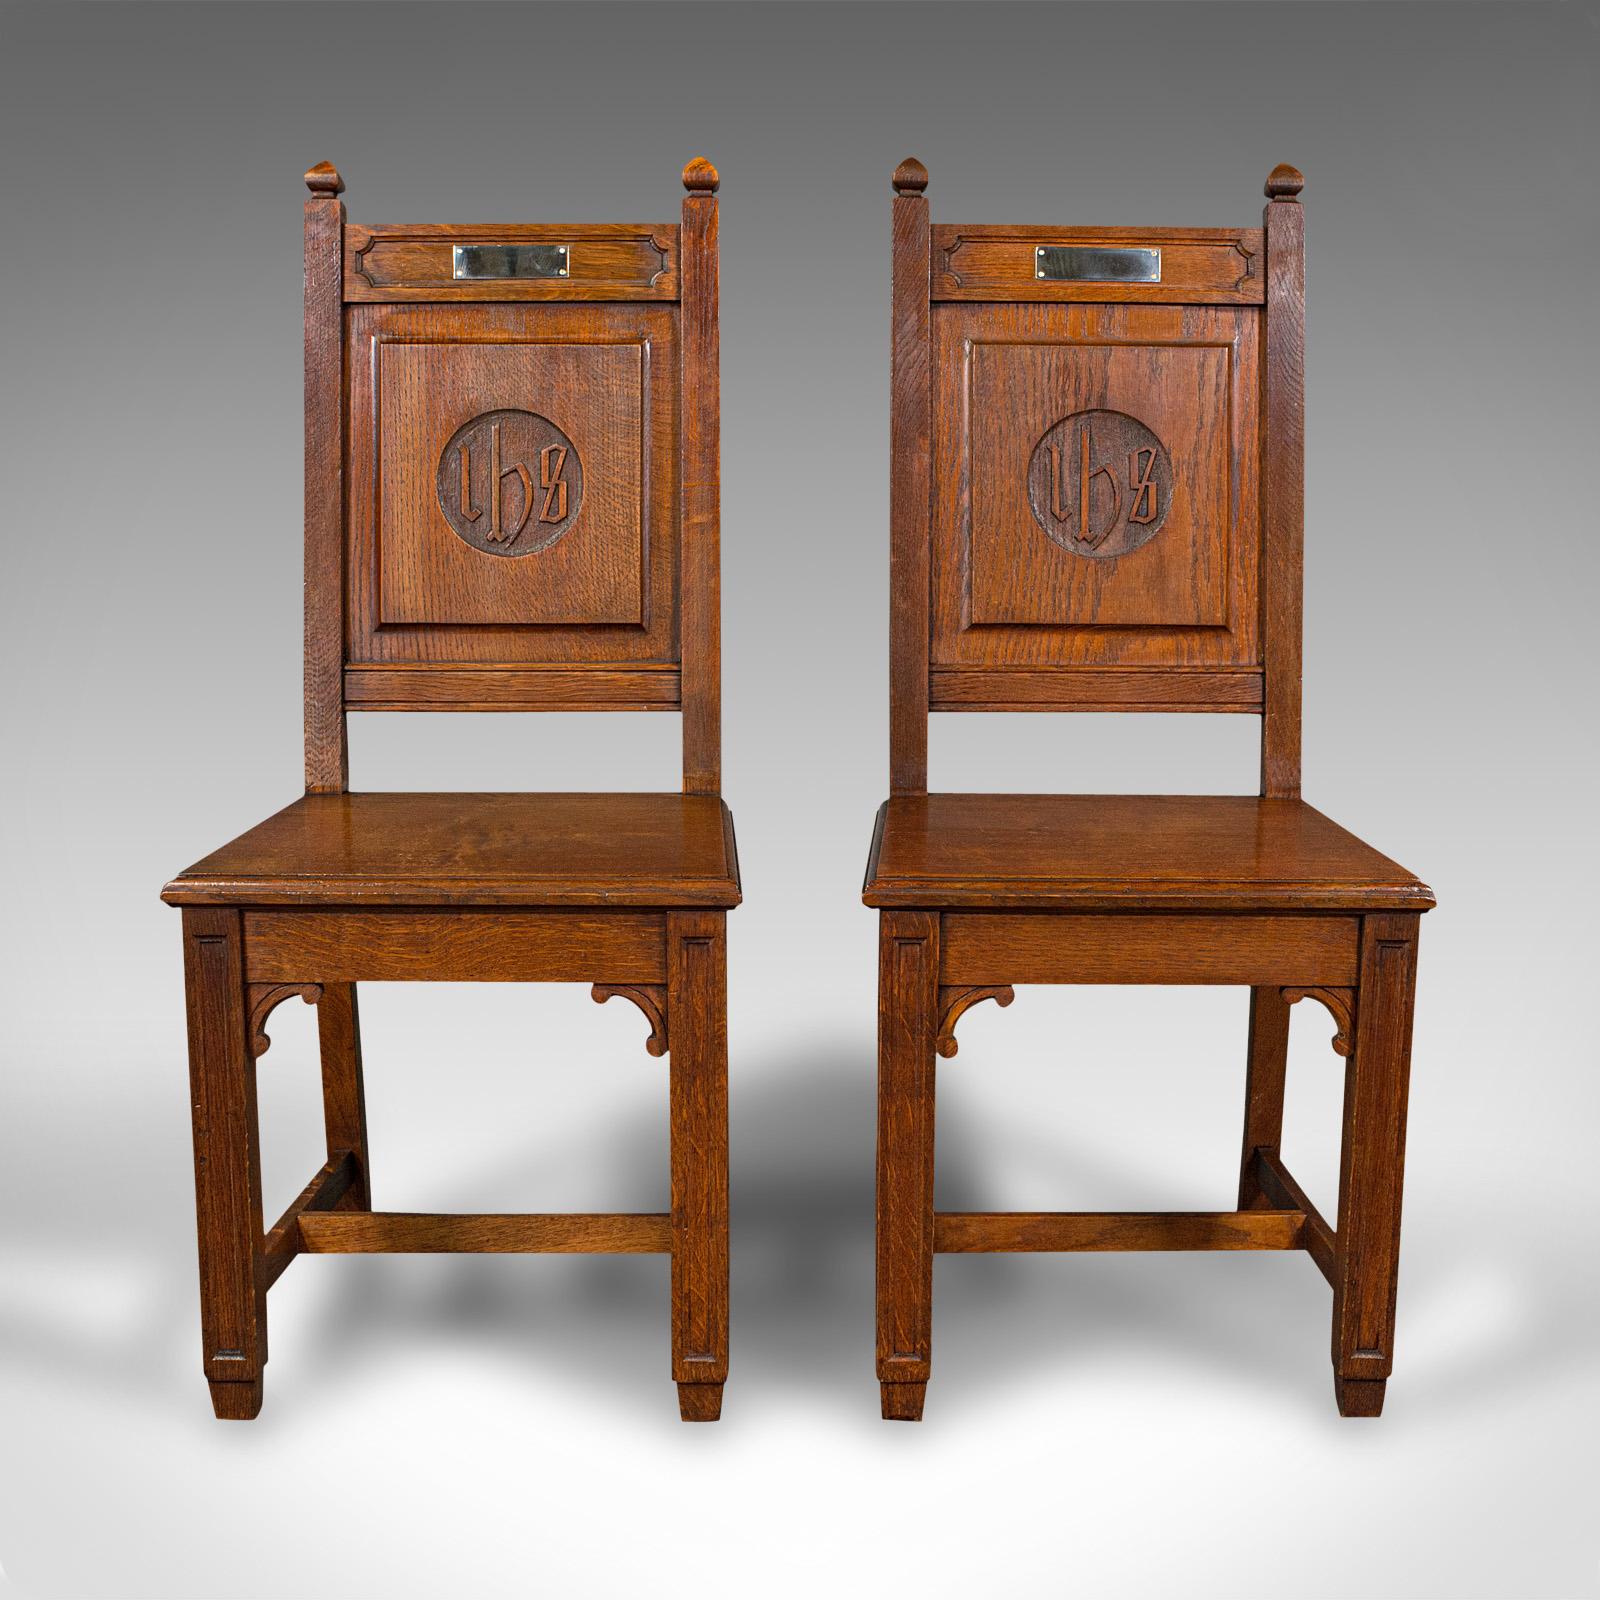 This is a pair of antique hall chairs. An English, oak, occasional dining seat displaying ecclesiastical taste, dating to the late Victorian period, circa 1900.

Robust and impressively stout chairs with beautiful figuring.
Displaying a desirable